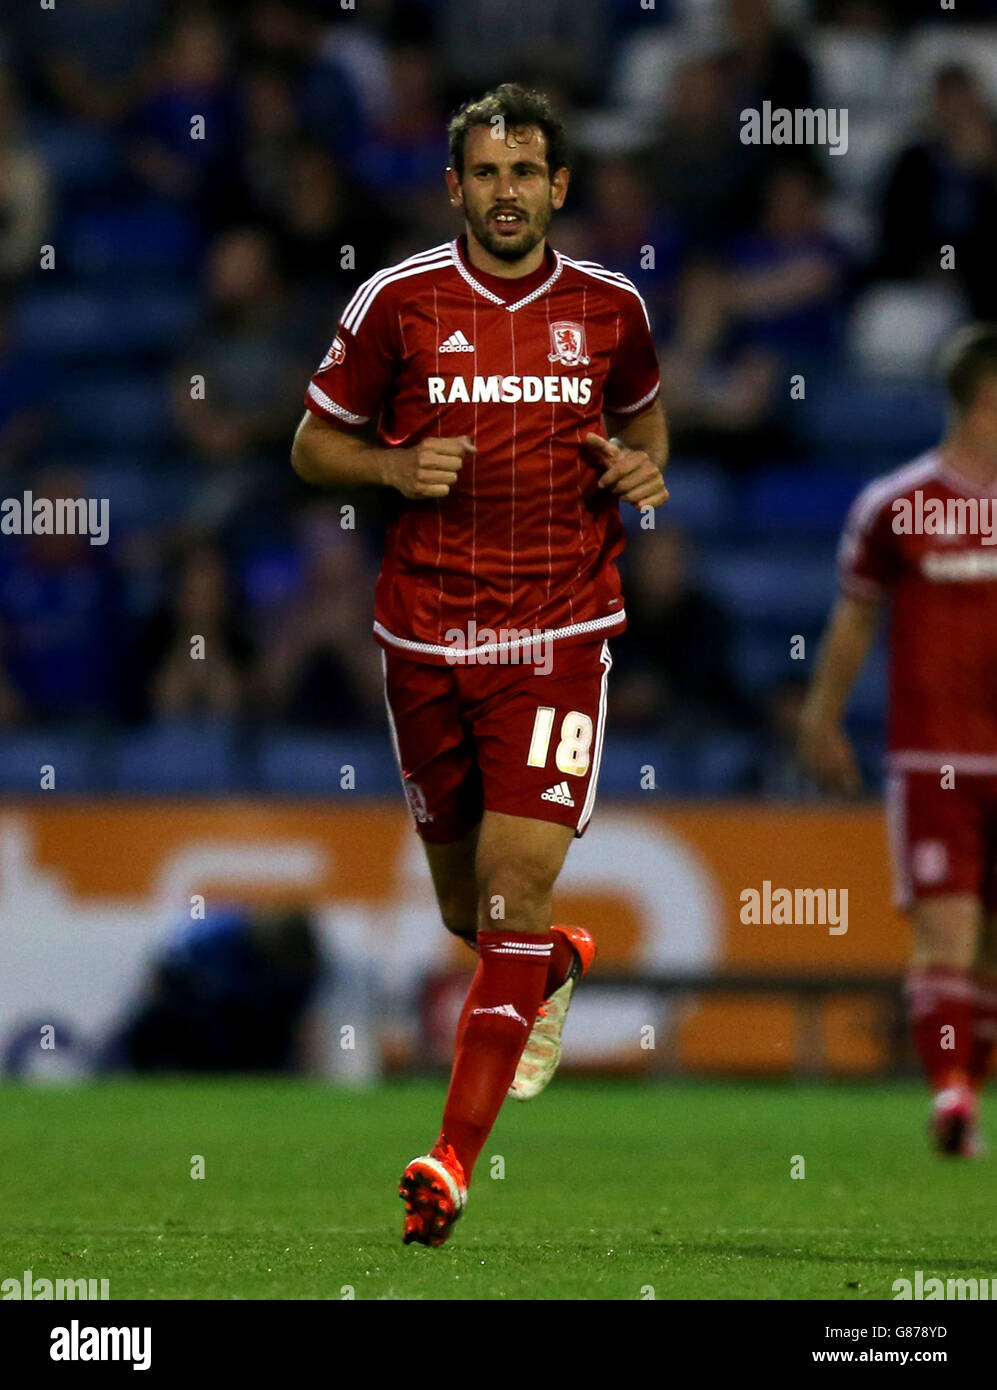 Middlesbrough's Christian Stuani during the Capital One Cup, First Round match at Boundary Park, Oldham. PRESS ASSOCIATION Photo. Picture date: Wednesday August 12, 2015. See PA story SOCCER Oldham. Photo credit should read: Simon Cooper/PA Wire. . No use with unauthorised audio, video, data, fixture lists, club/league logos or 'live' services. Online in-match use limited to 45 images, no video emulation. No use in betting, games or single club/league/player publications. Stock Photo